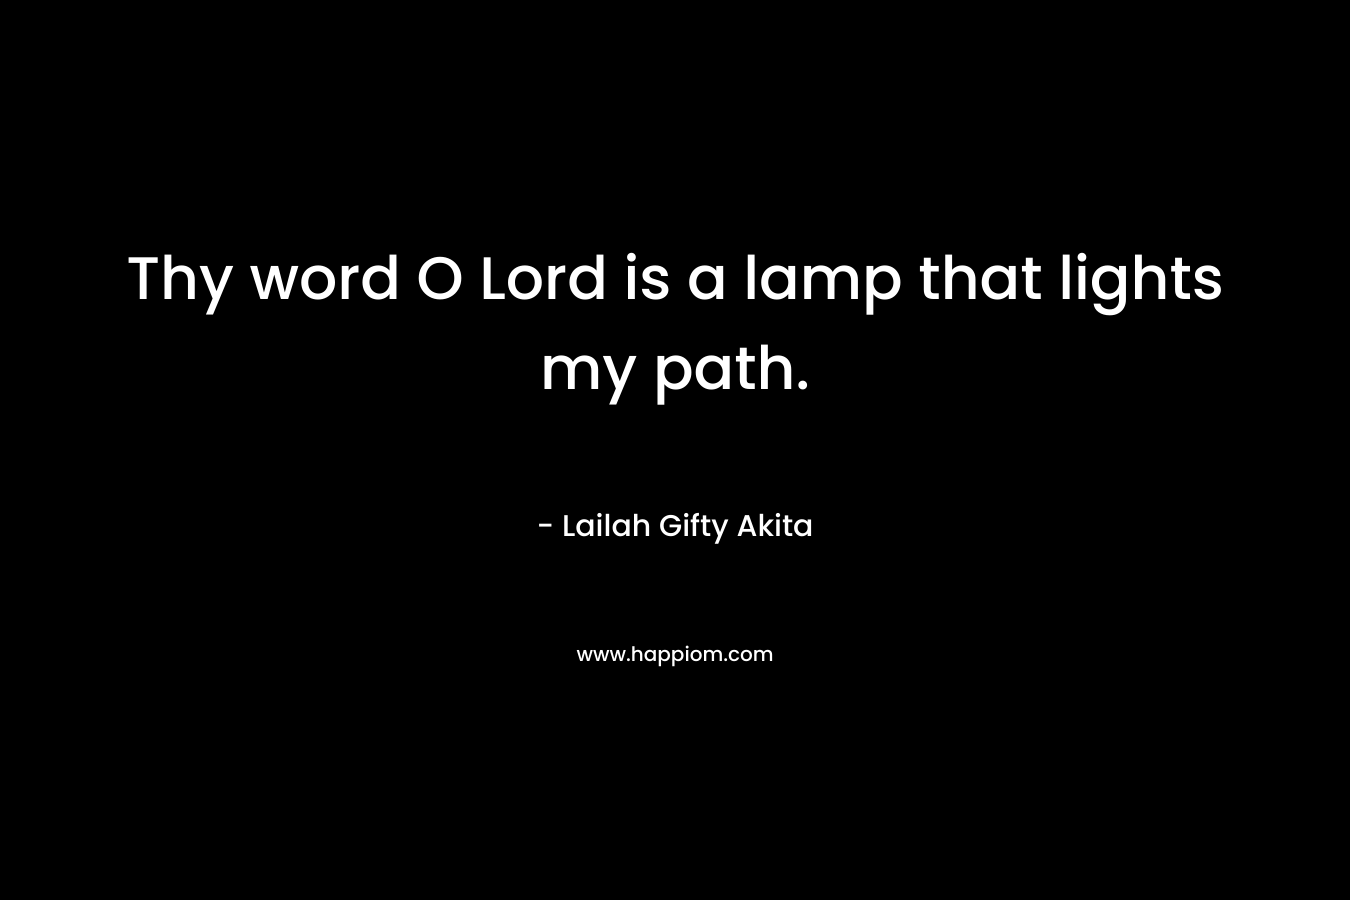 Thy word O Lord is a lamp that lights my path.